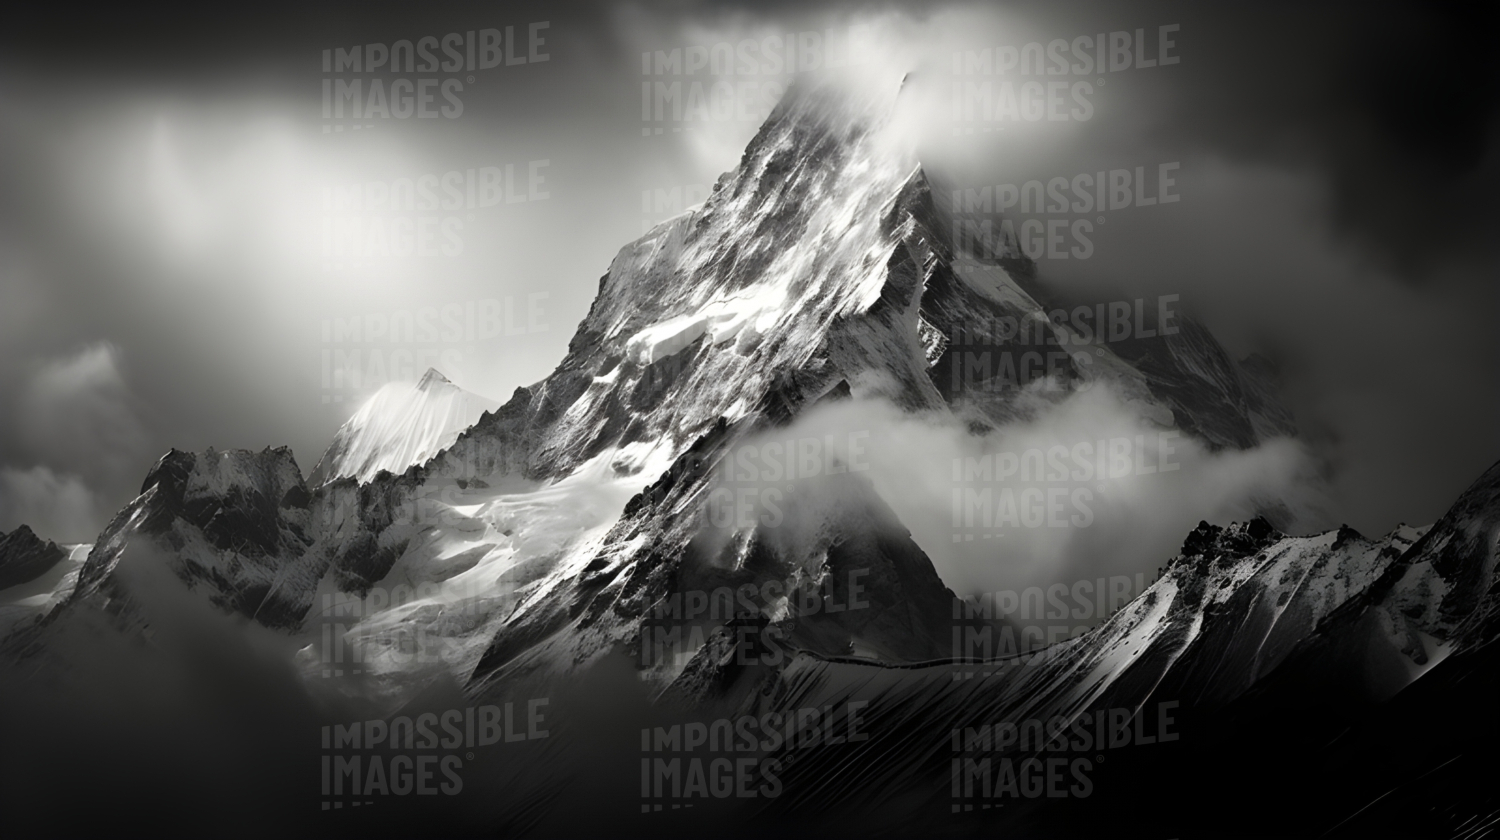 Dramatic black and white mountain photography